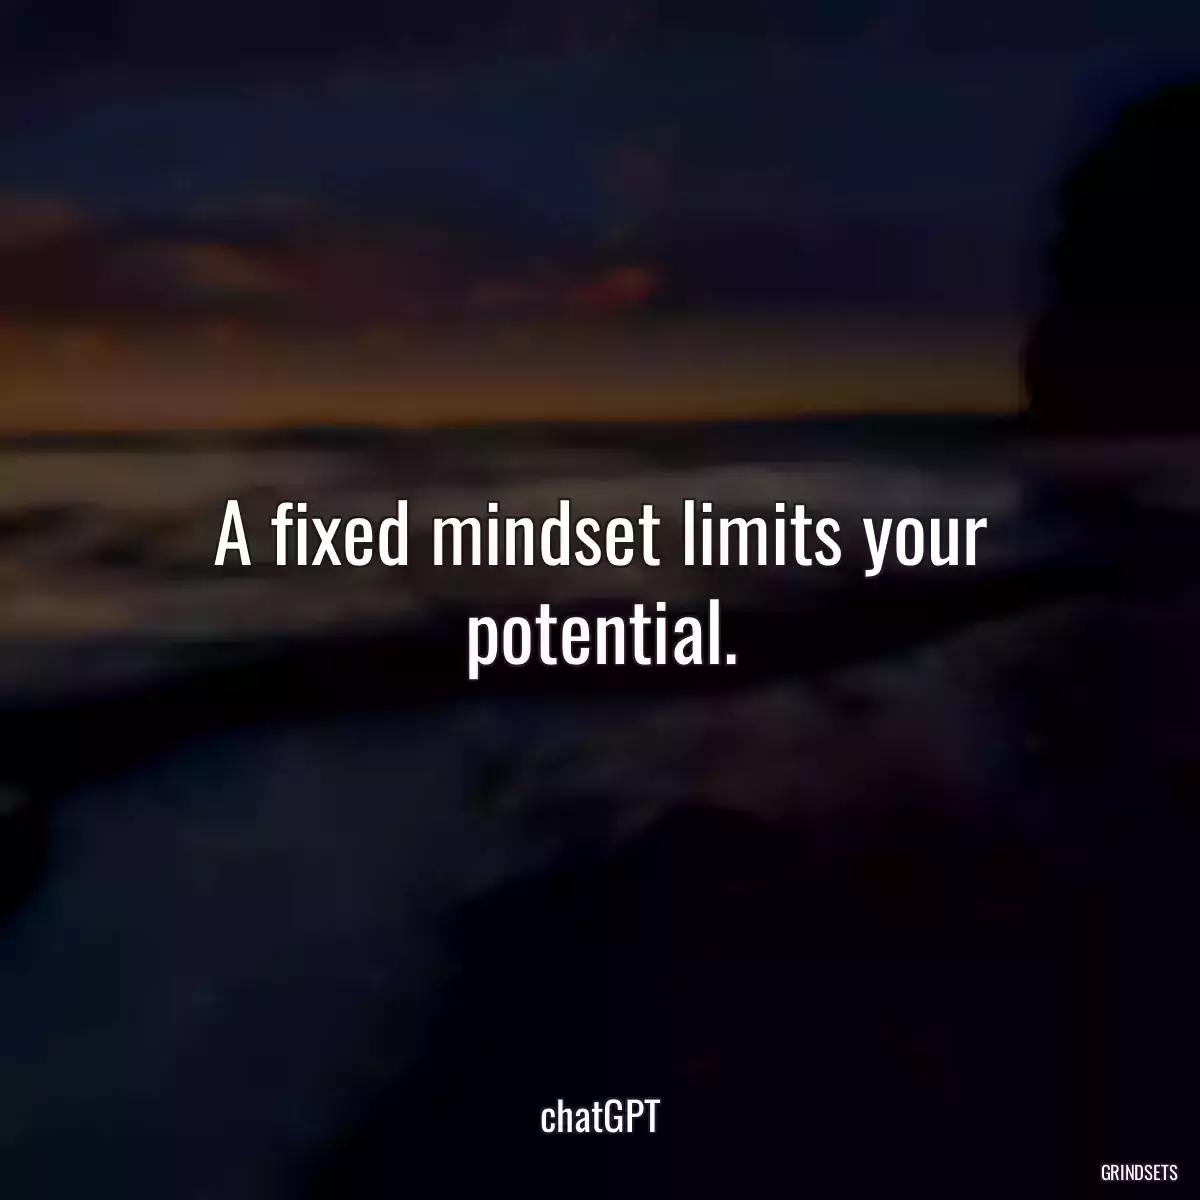 A fixed mindset limits your potential.